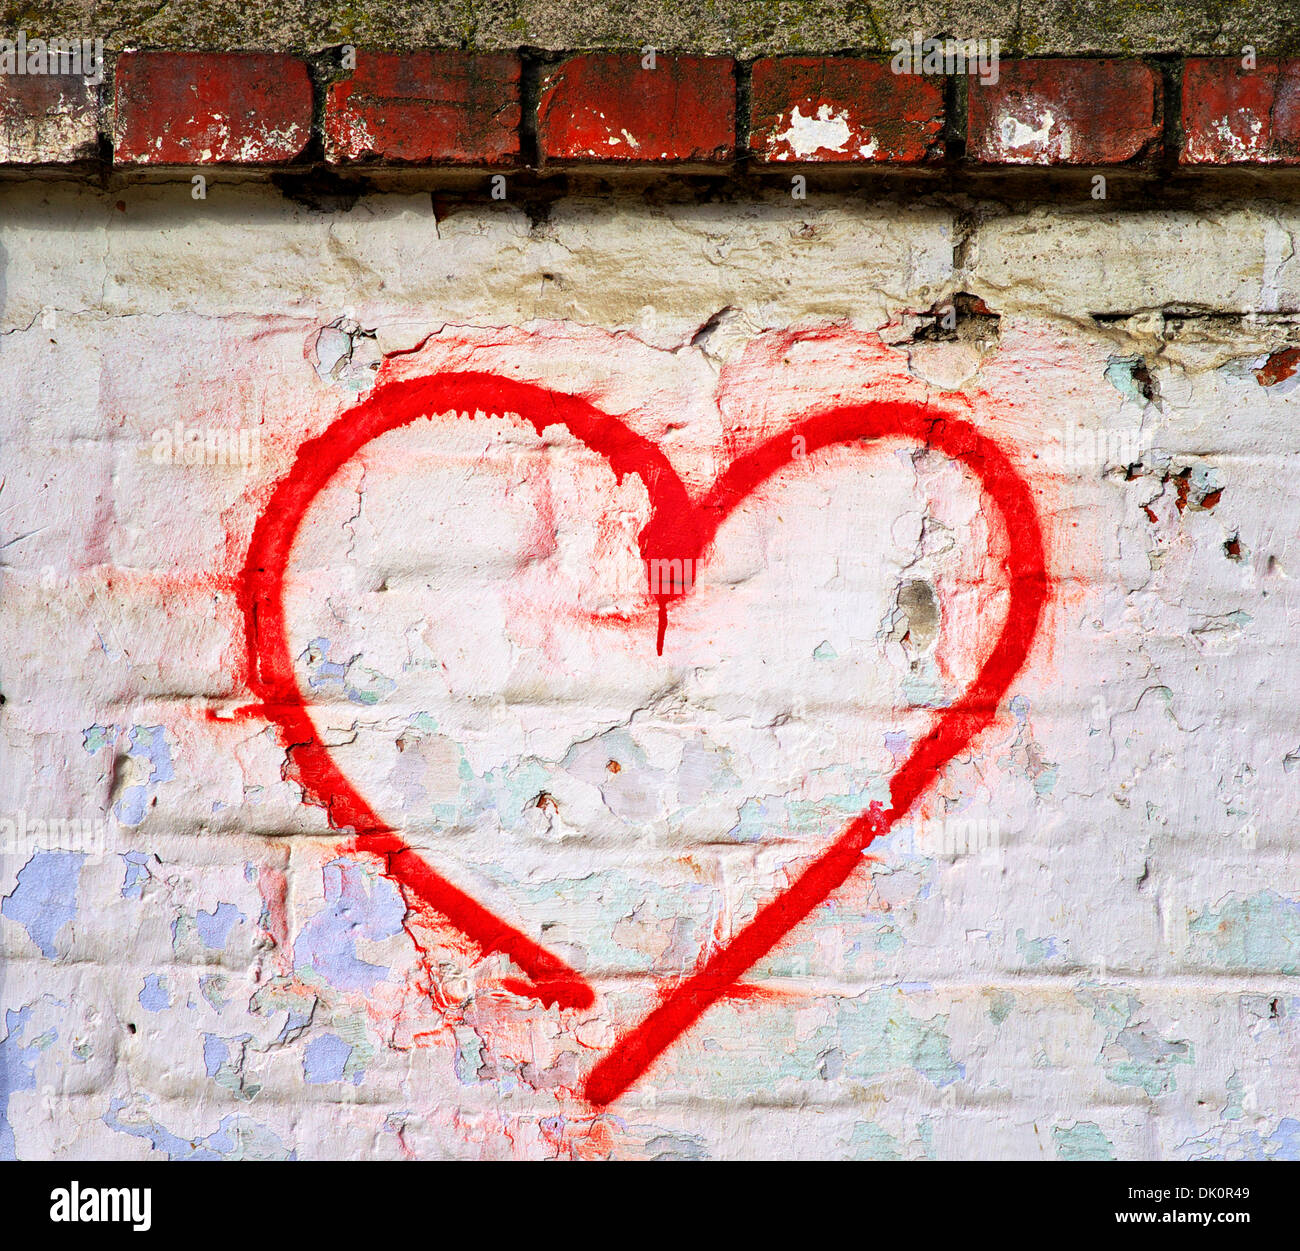 Red Love Heart hand drawn on brick wall grunge textured background trendy street style Stock Photo